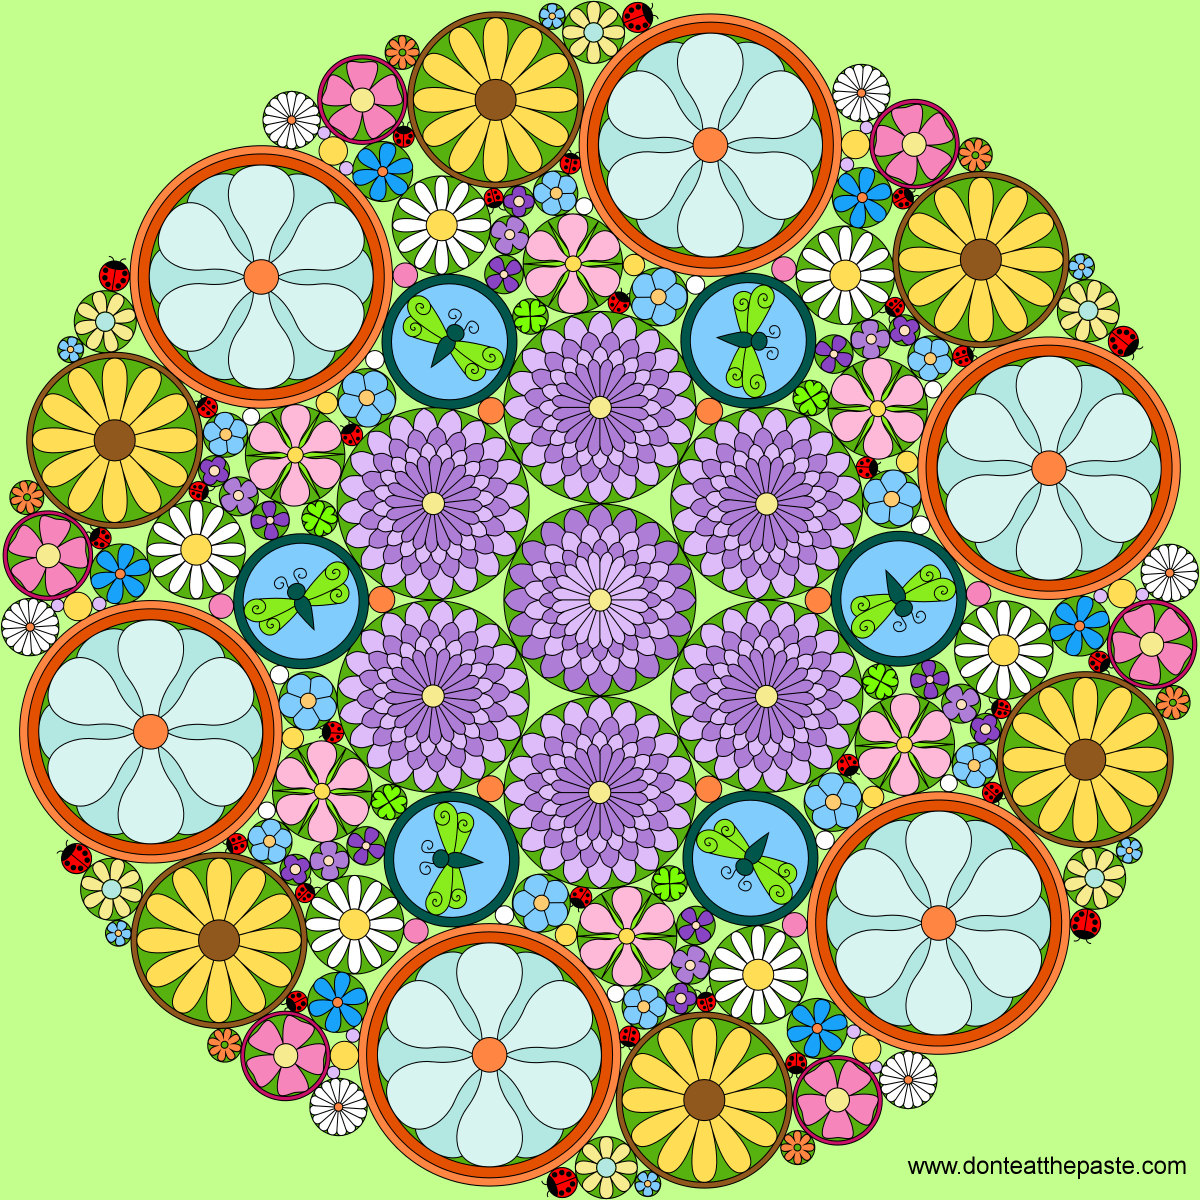 Download Don't Eat the Paste: Really intricate flower mandala to color